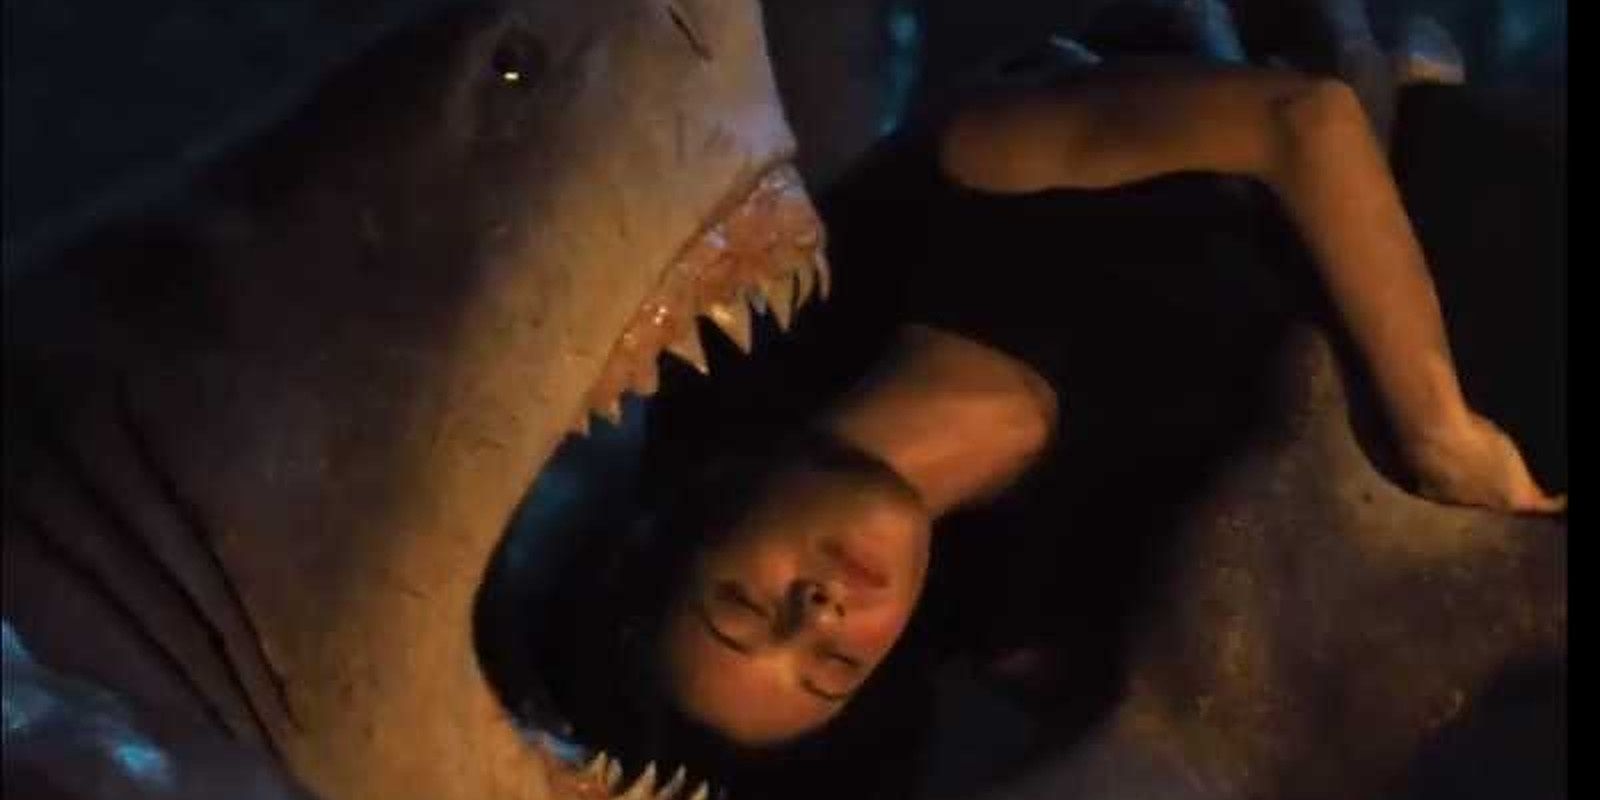 King Shark tries to eat Ratcatcher 2 in Suicide Squad